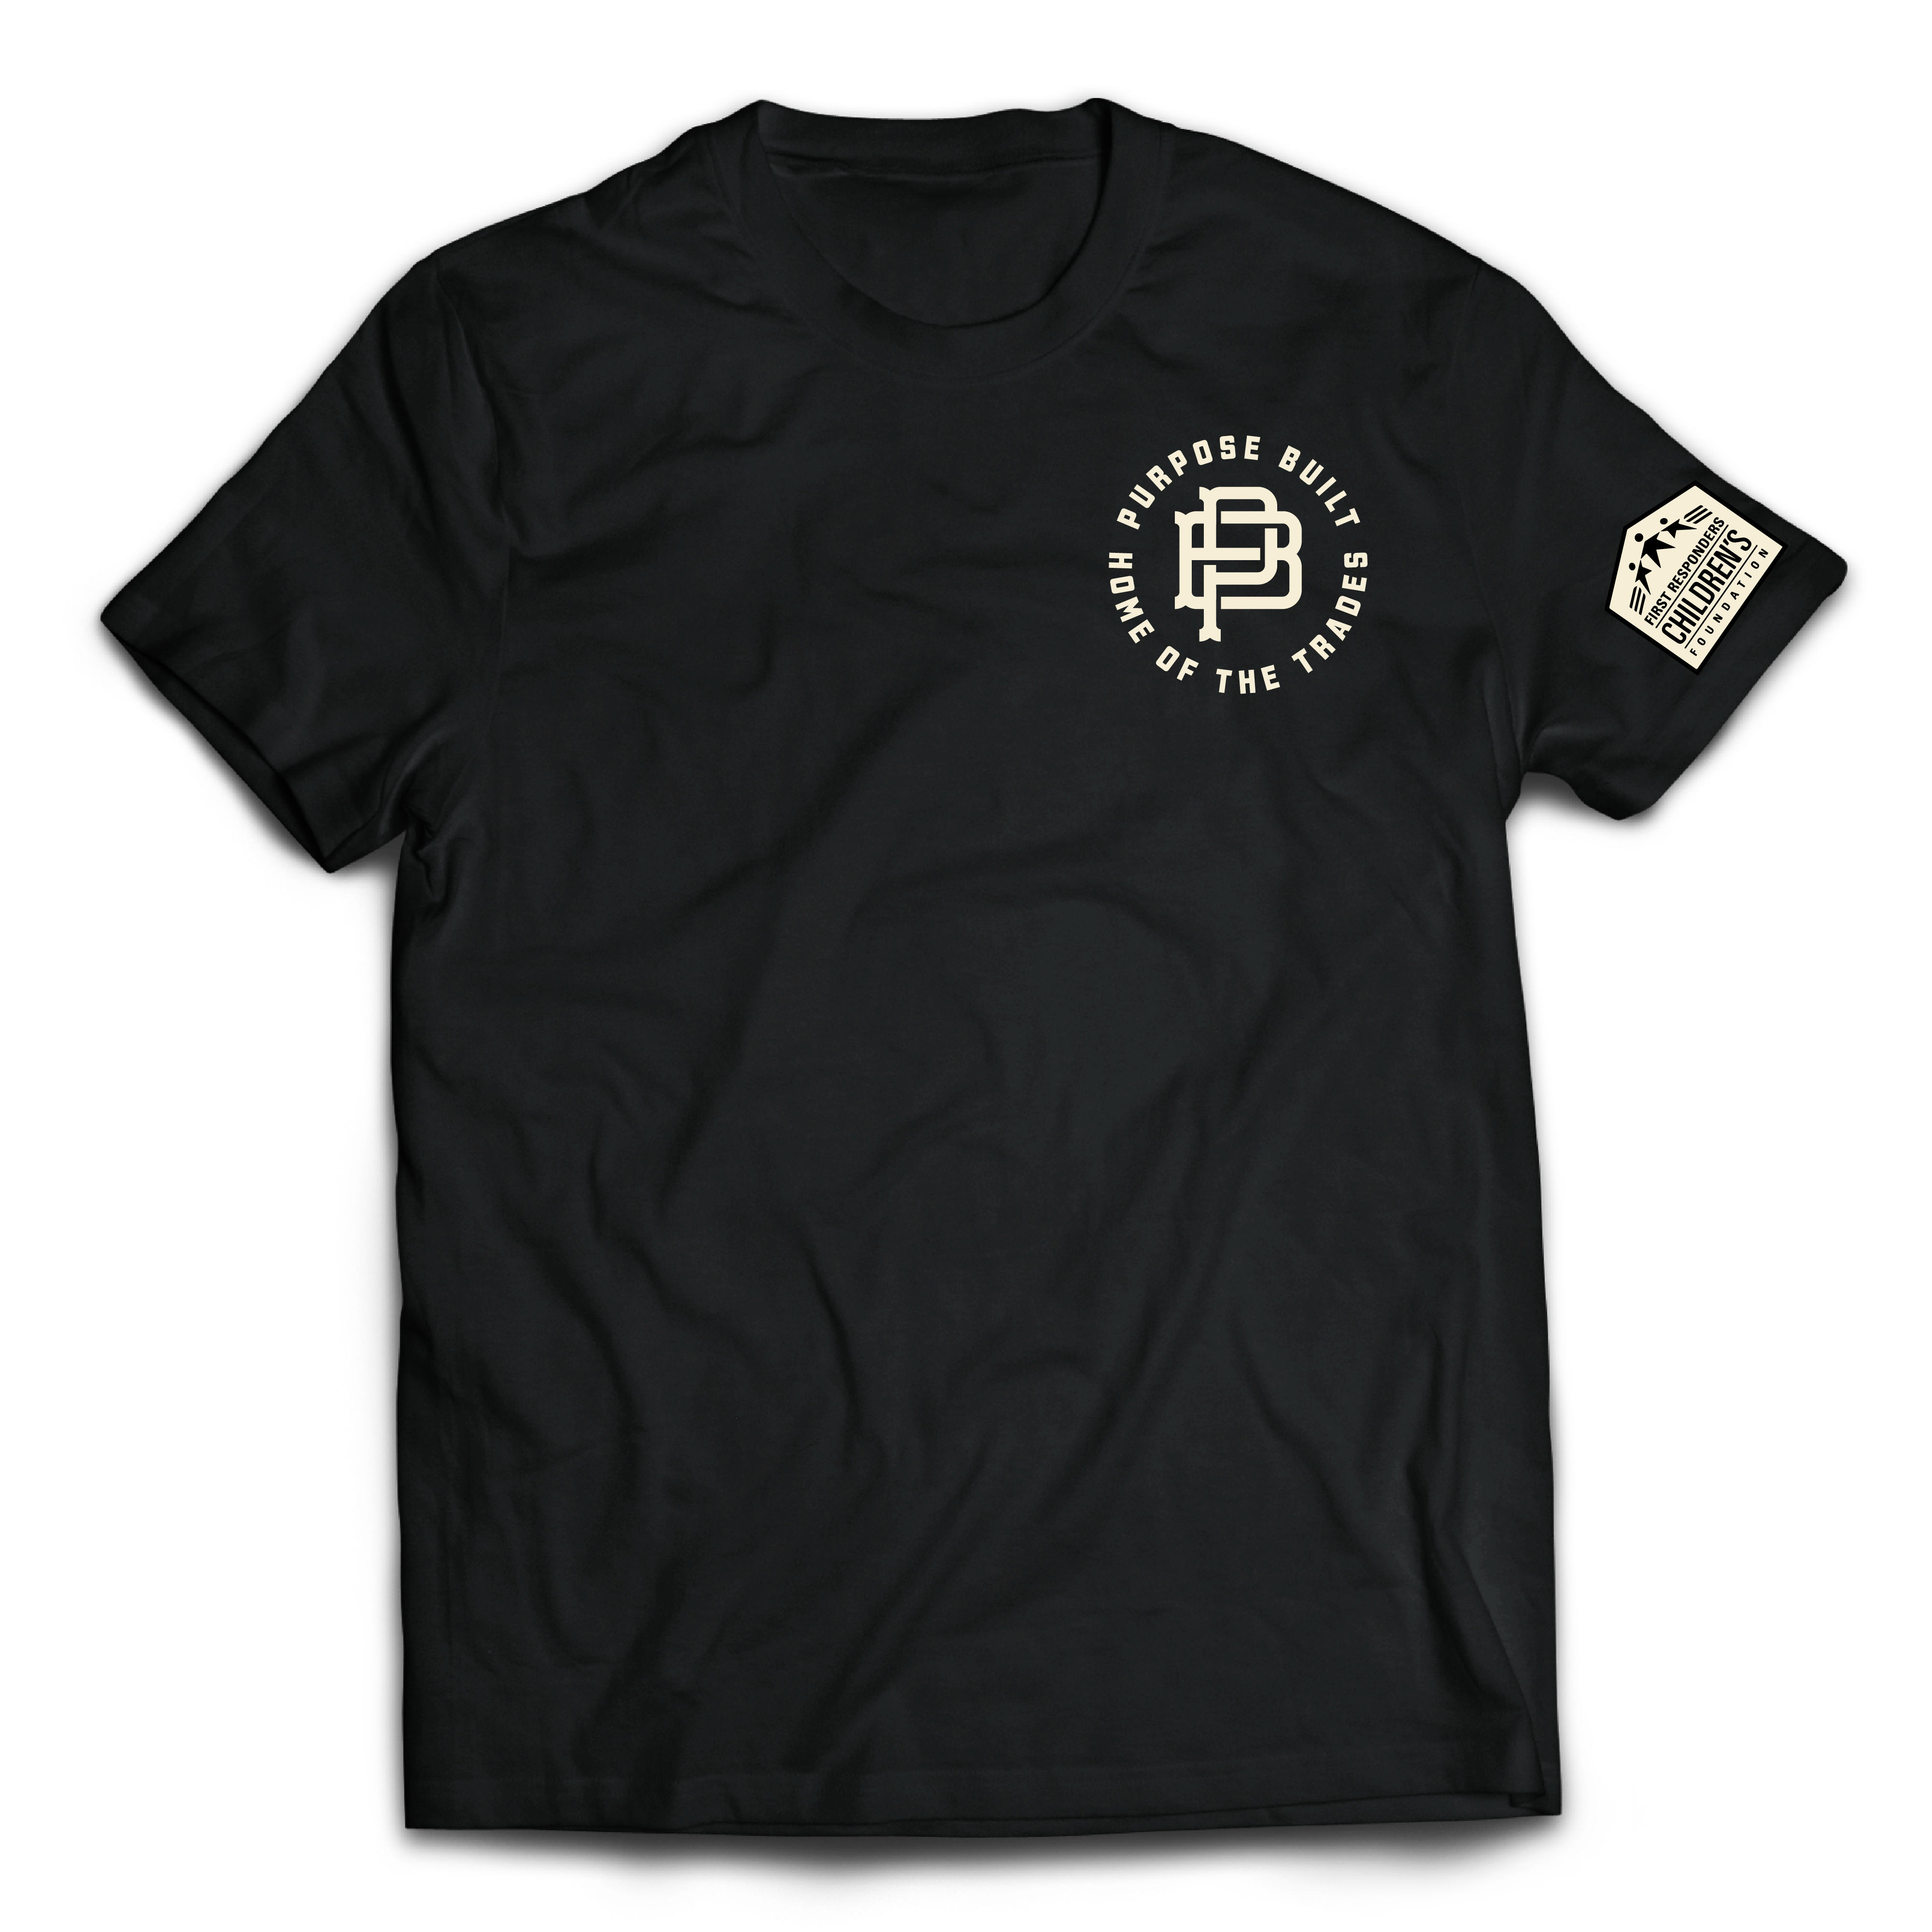 Rods & Rigs Charity Tee, Black